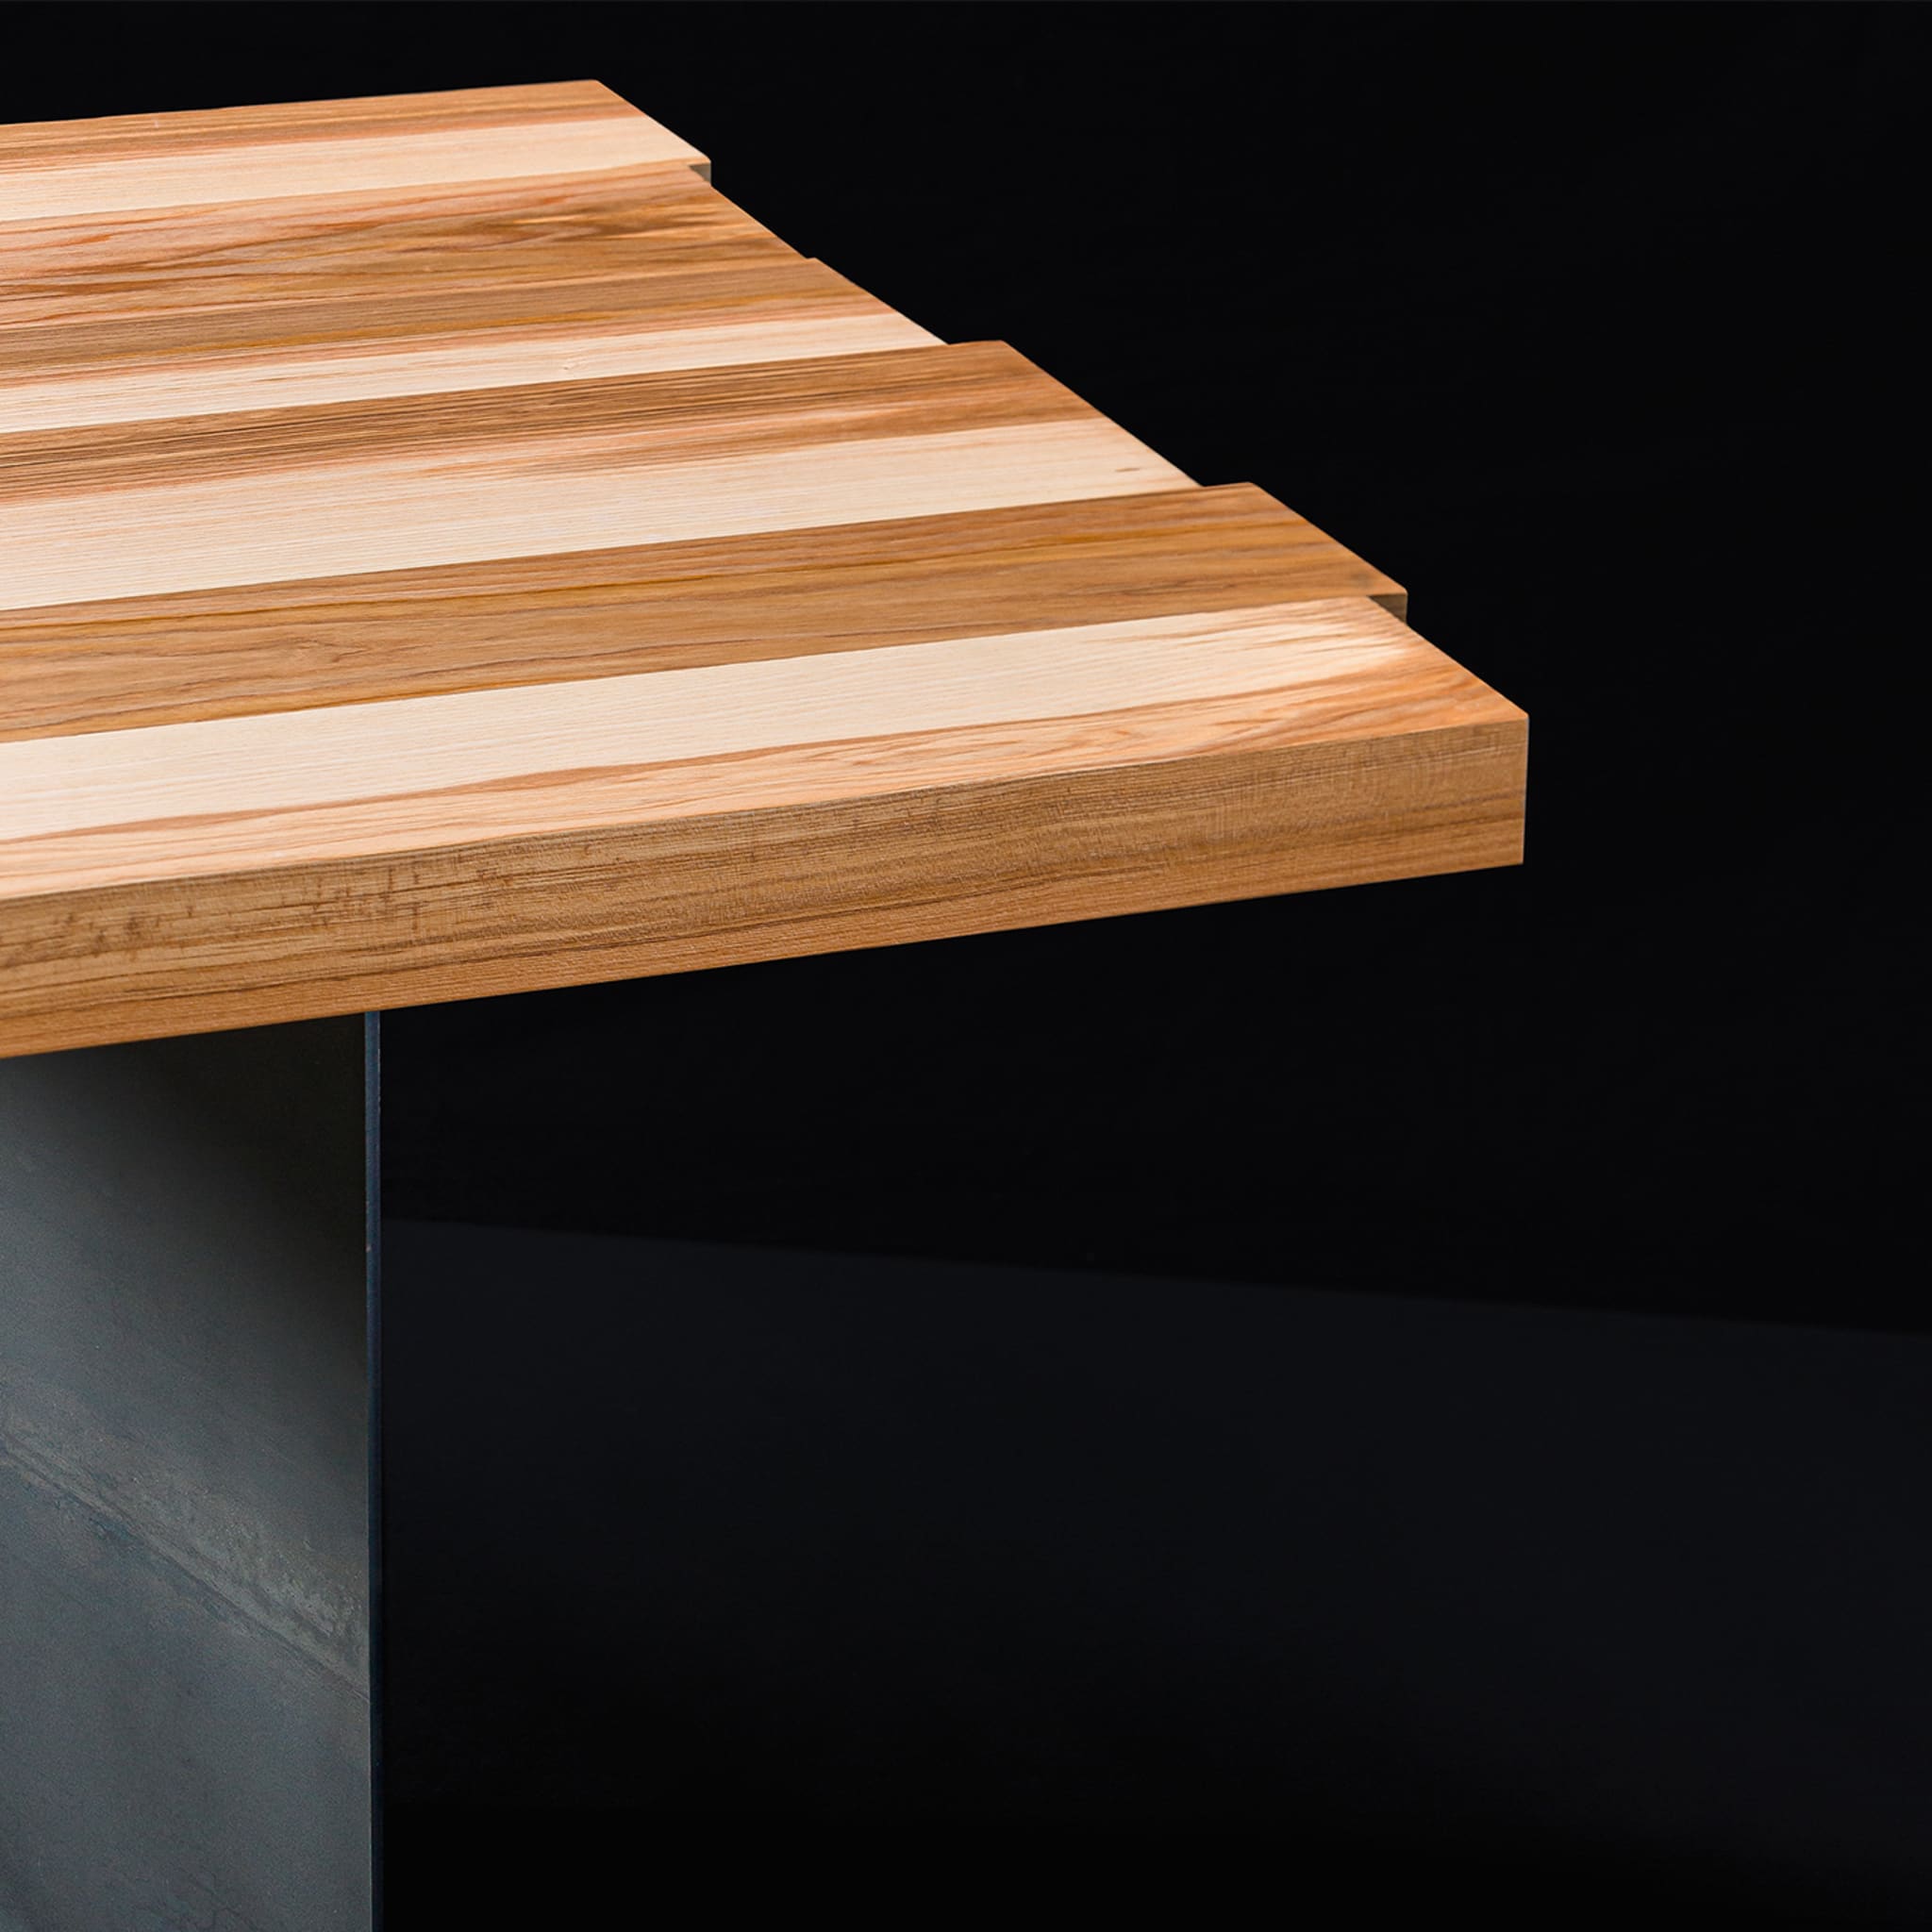 Olive ash dining table - Alternative view 3